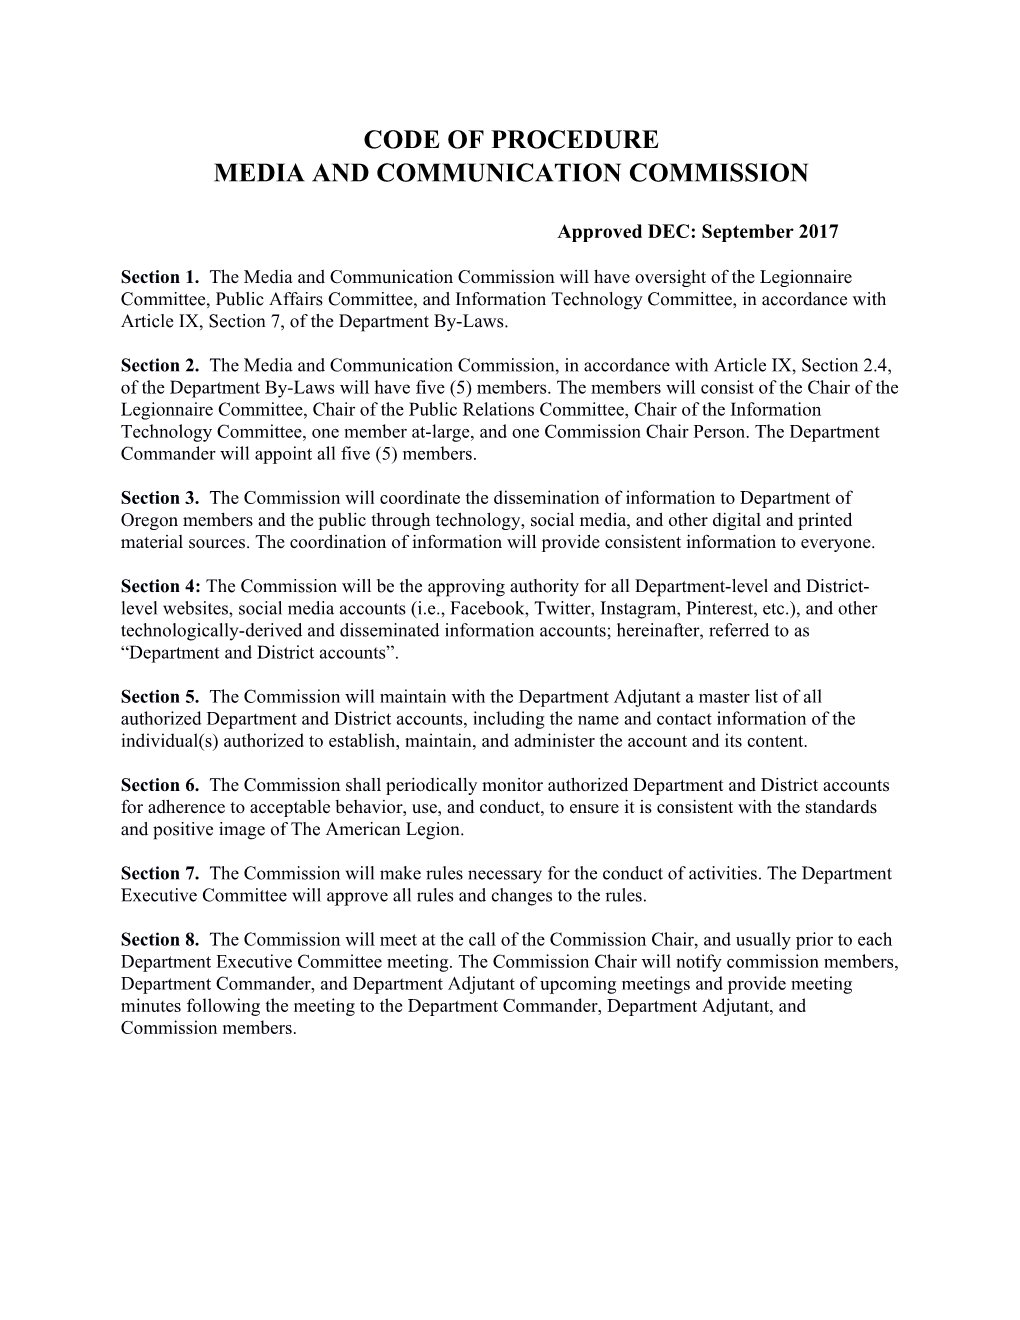 Media and Communication Commission